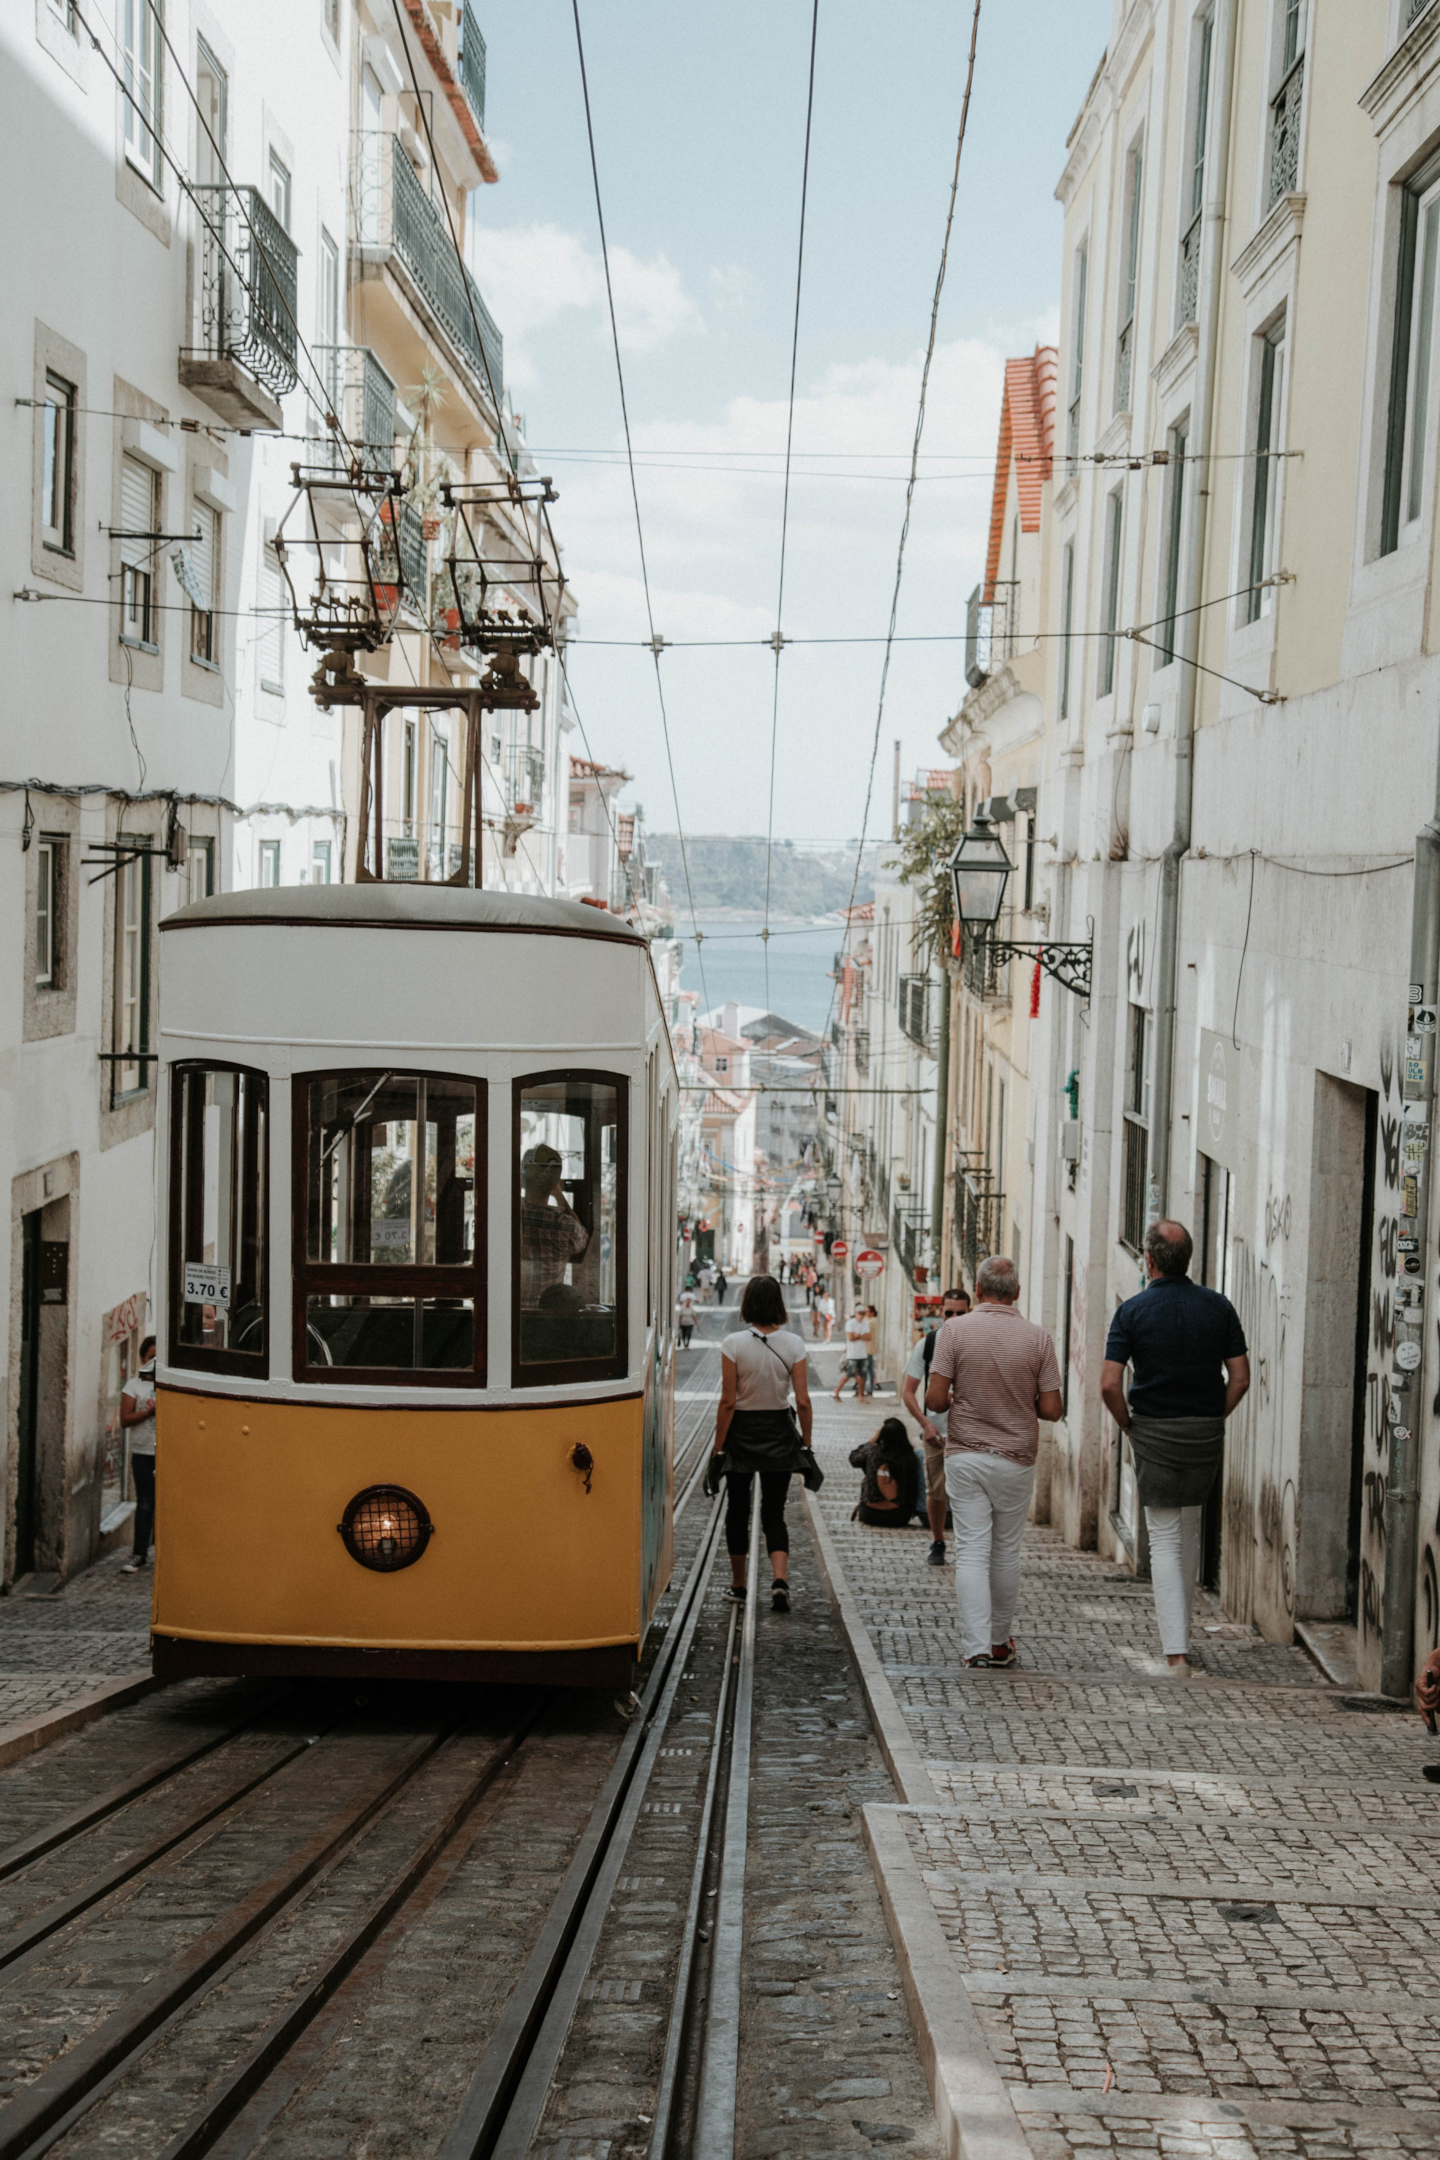 Portugal is a safe and accessible destination